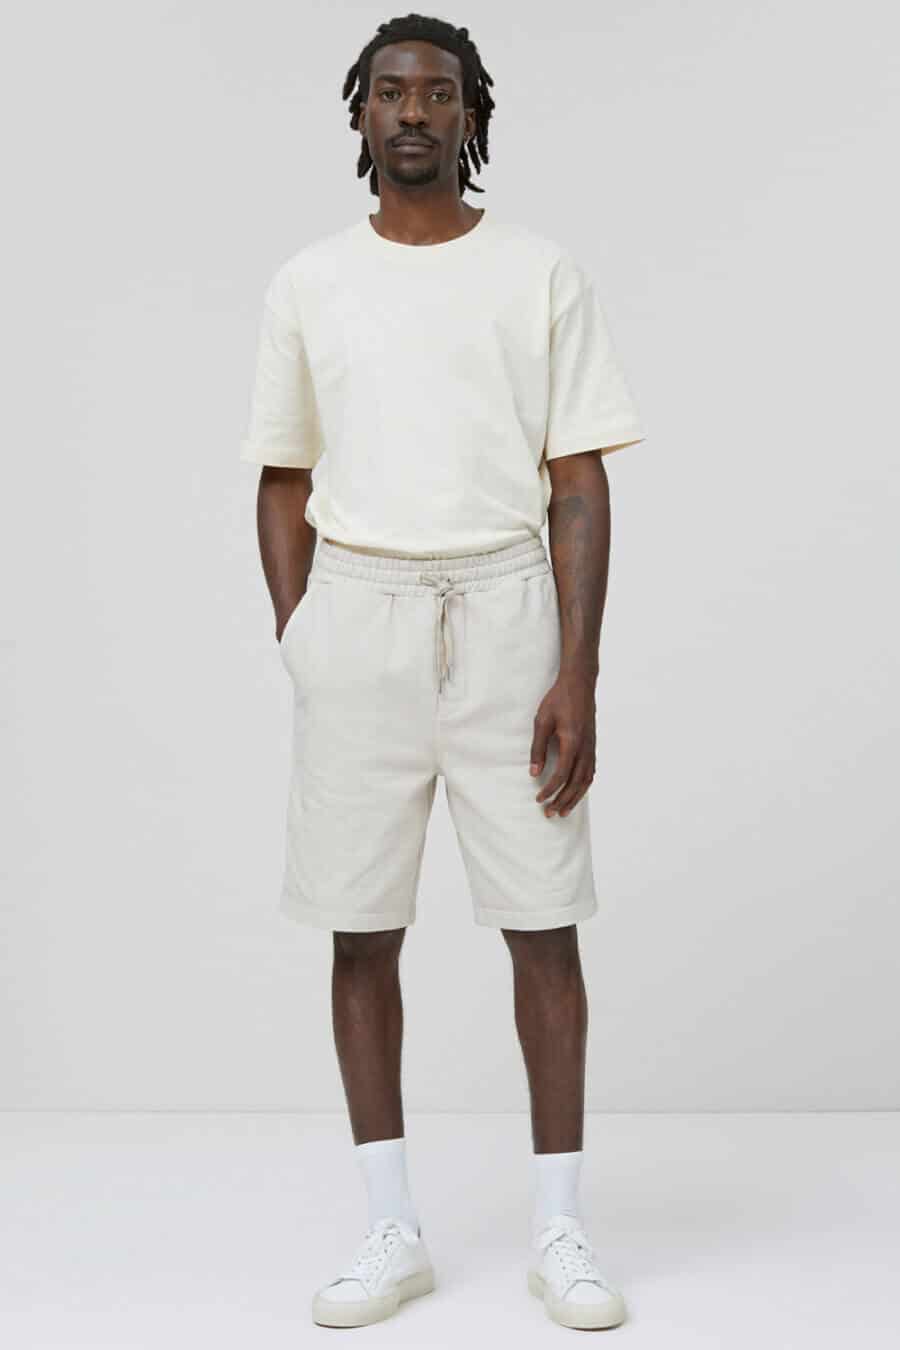 Men's jersey shorts, white t-shirt and white sneakers outfit